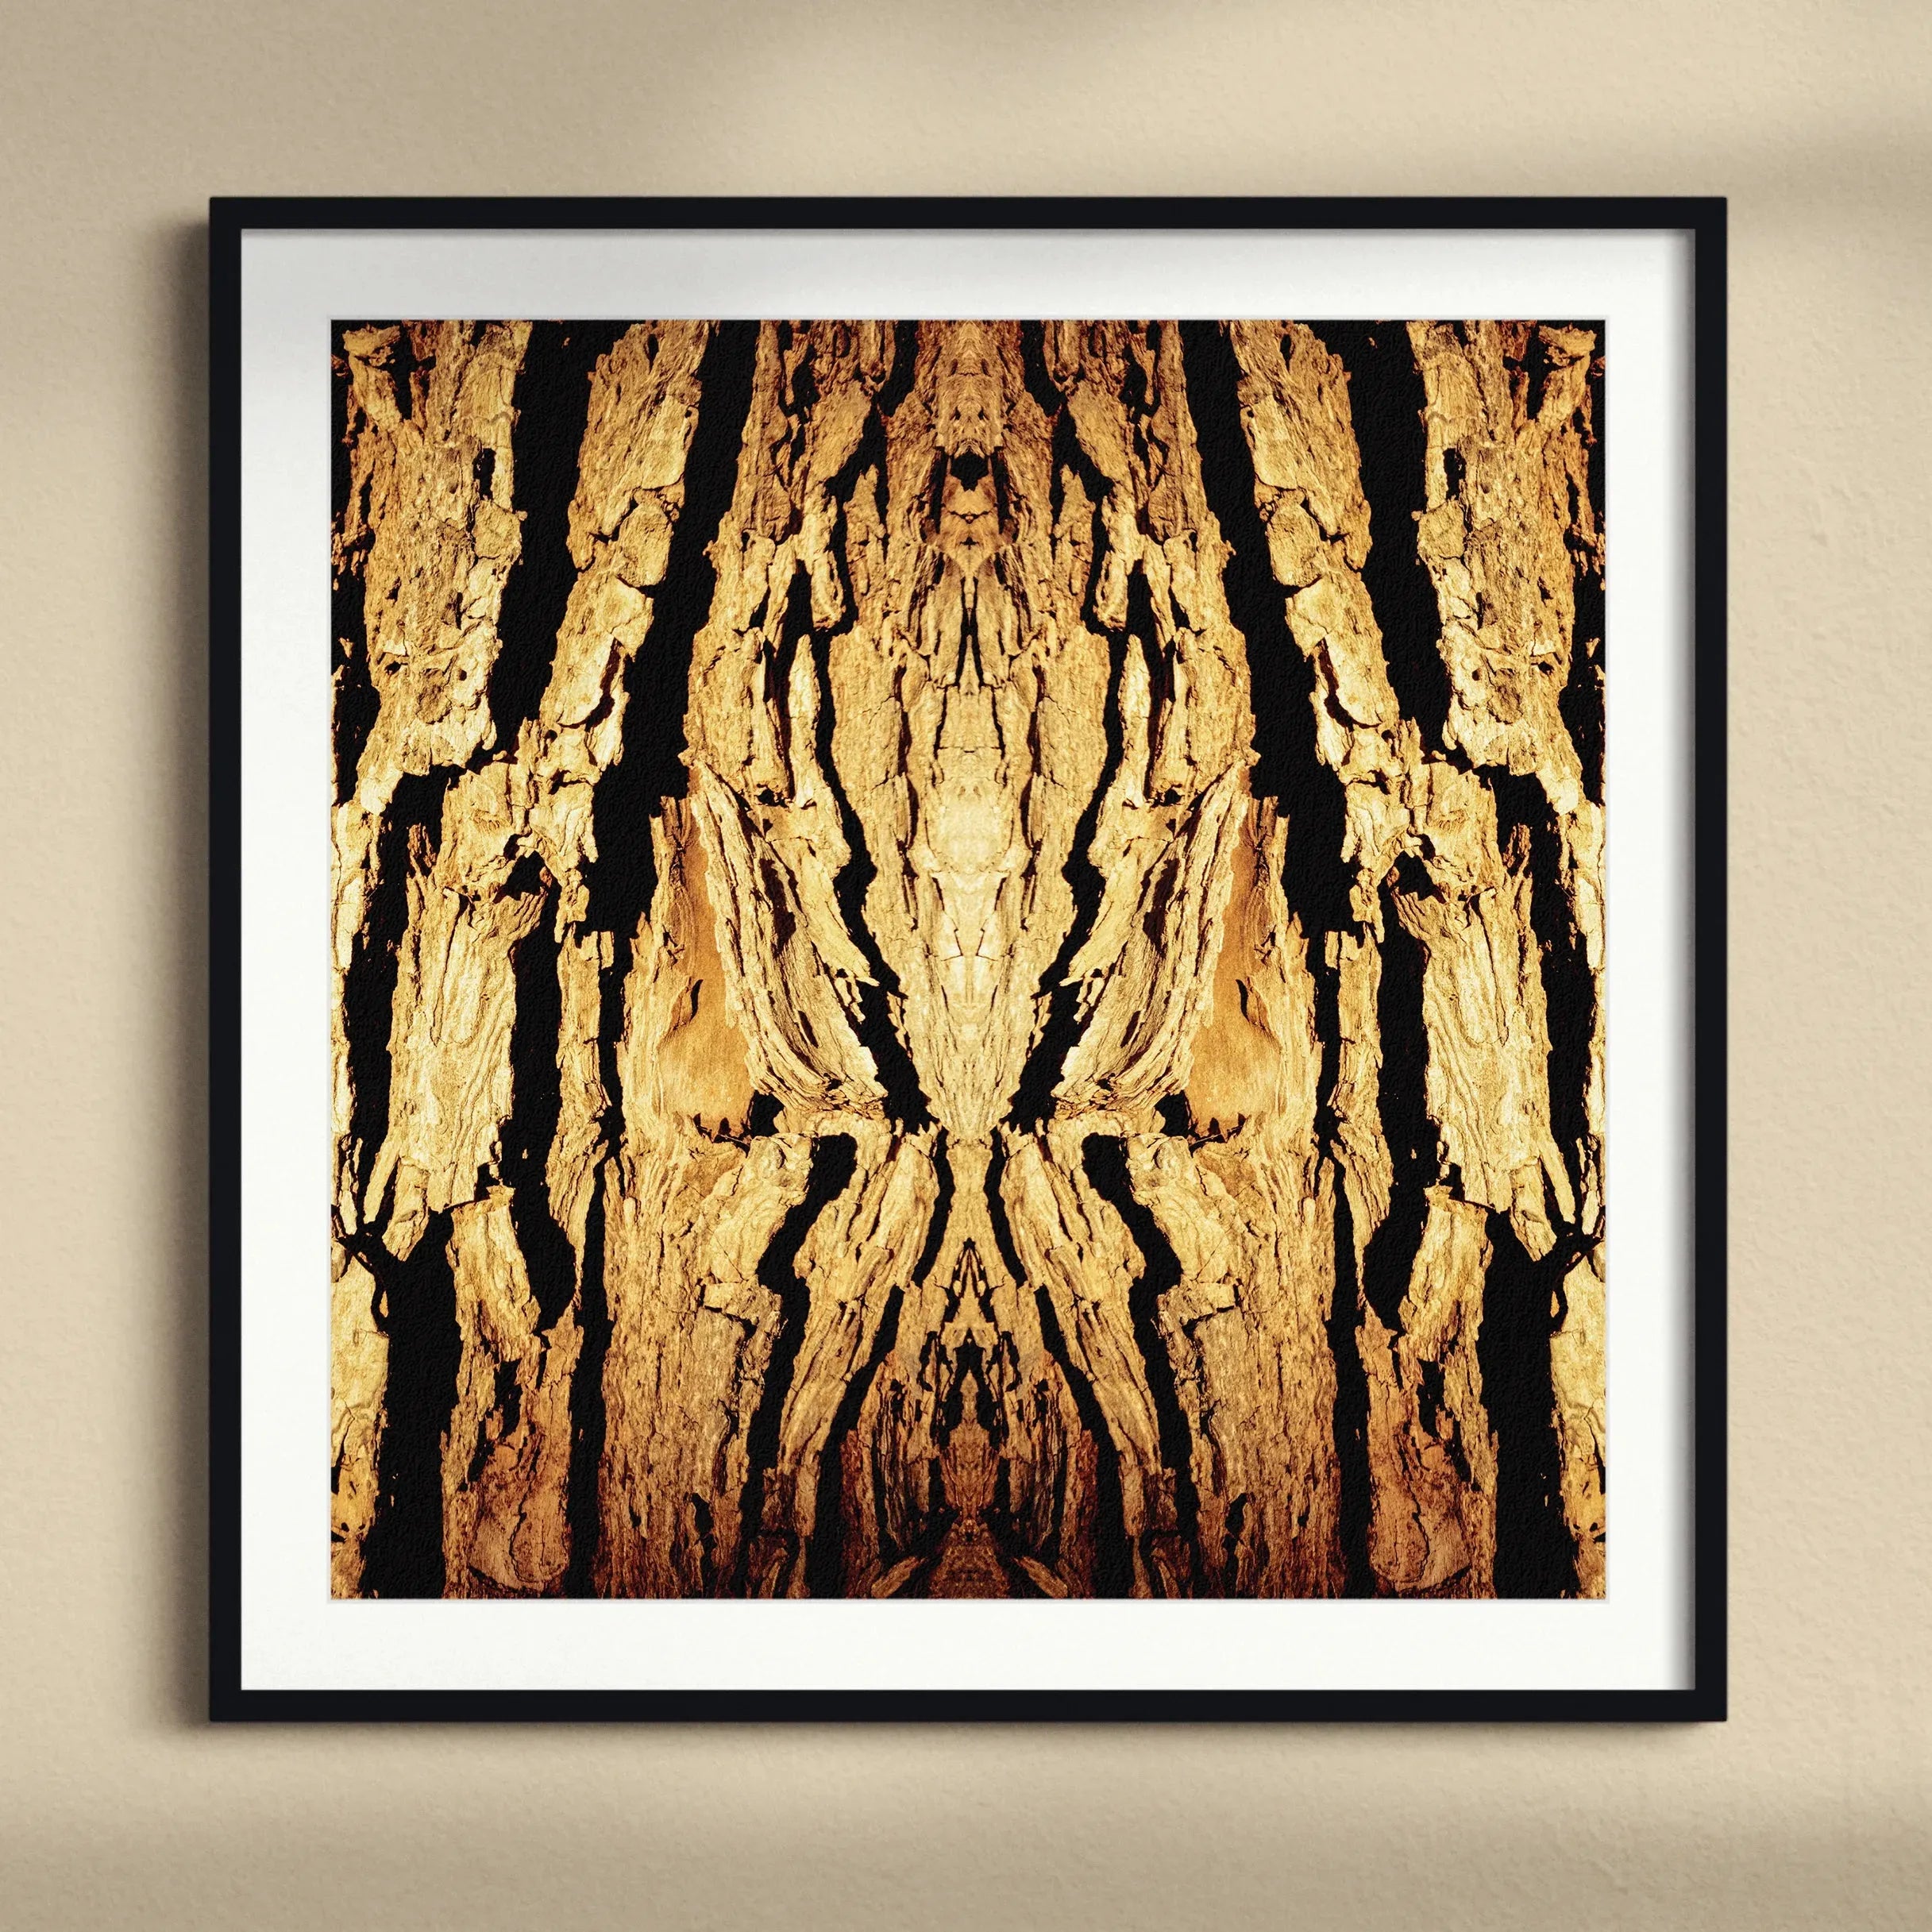 Barking Mad Framed & Mounted Print - Posters Prints & Visual Artwork - Aesthetic Art